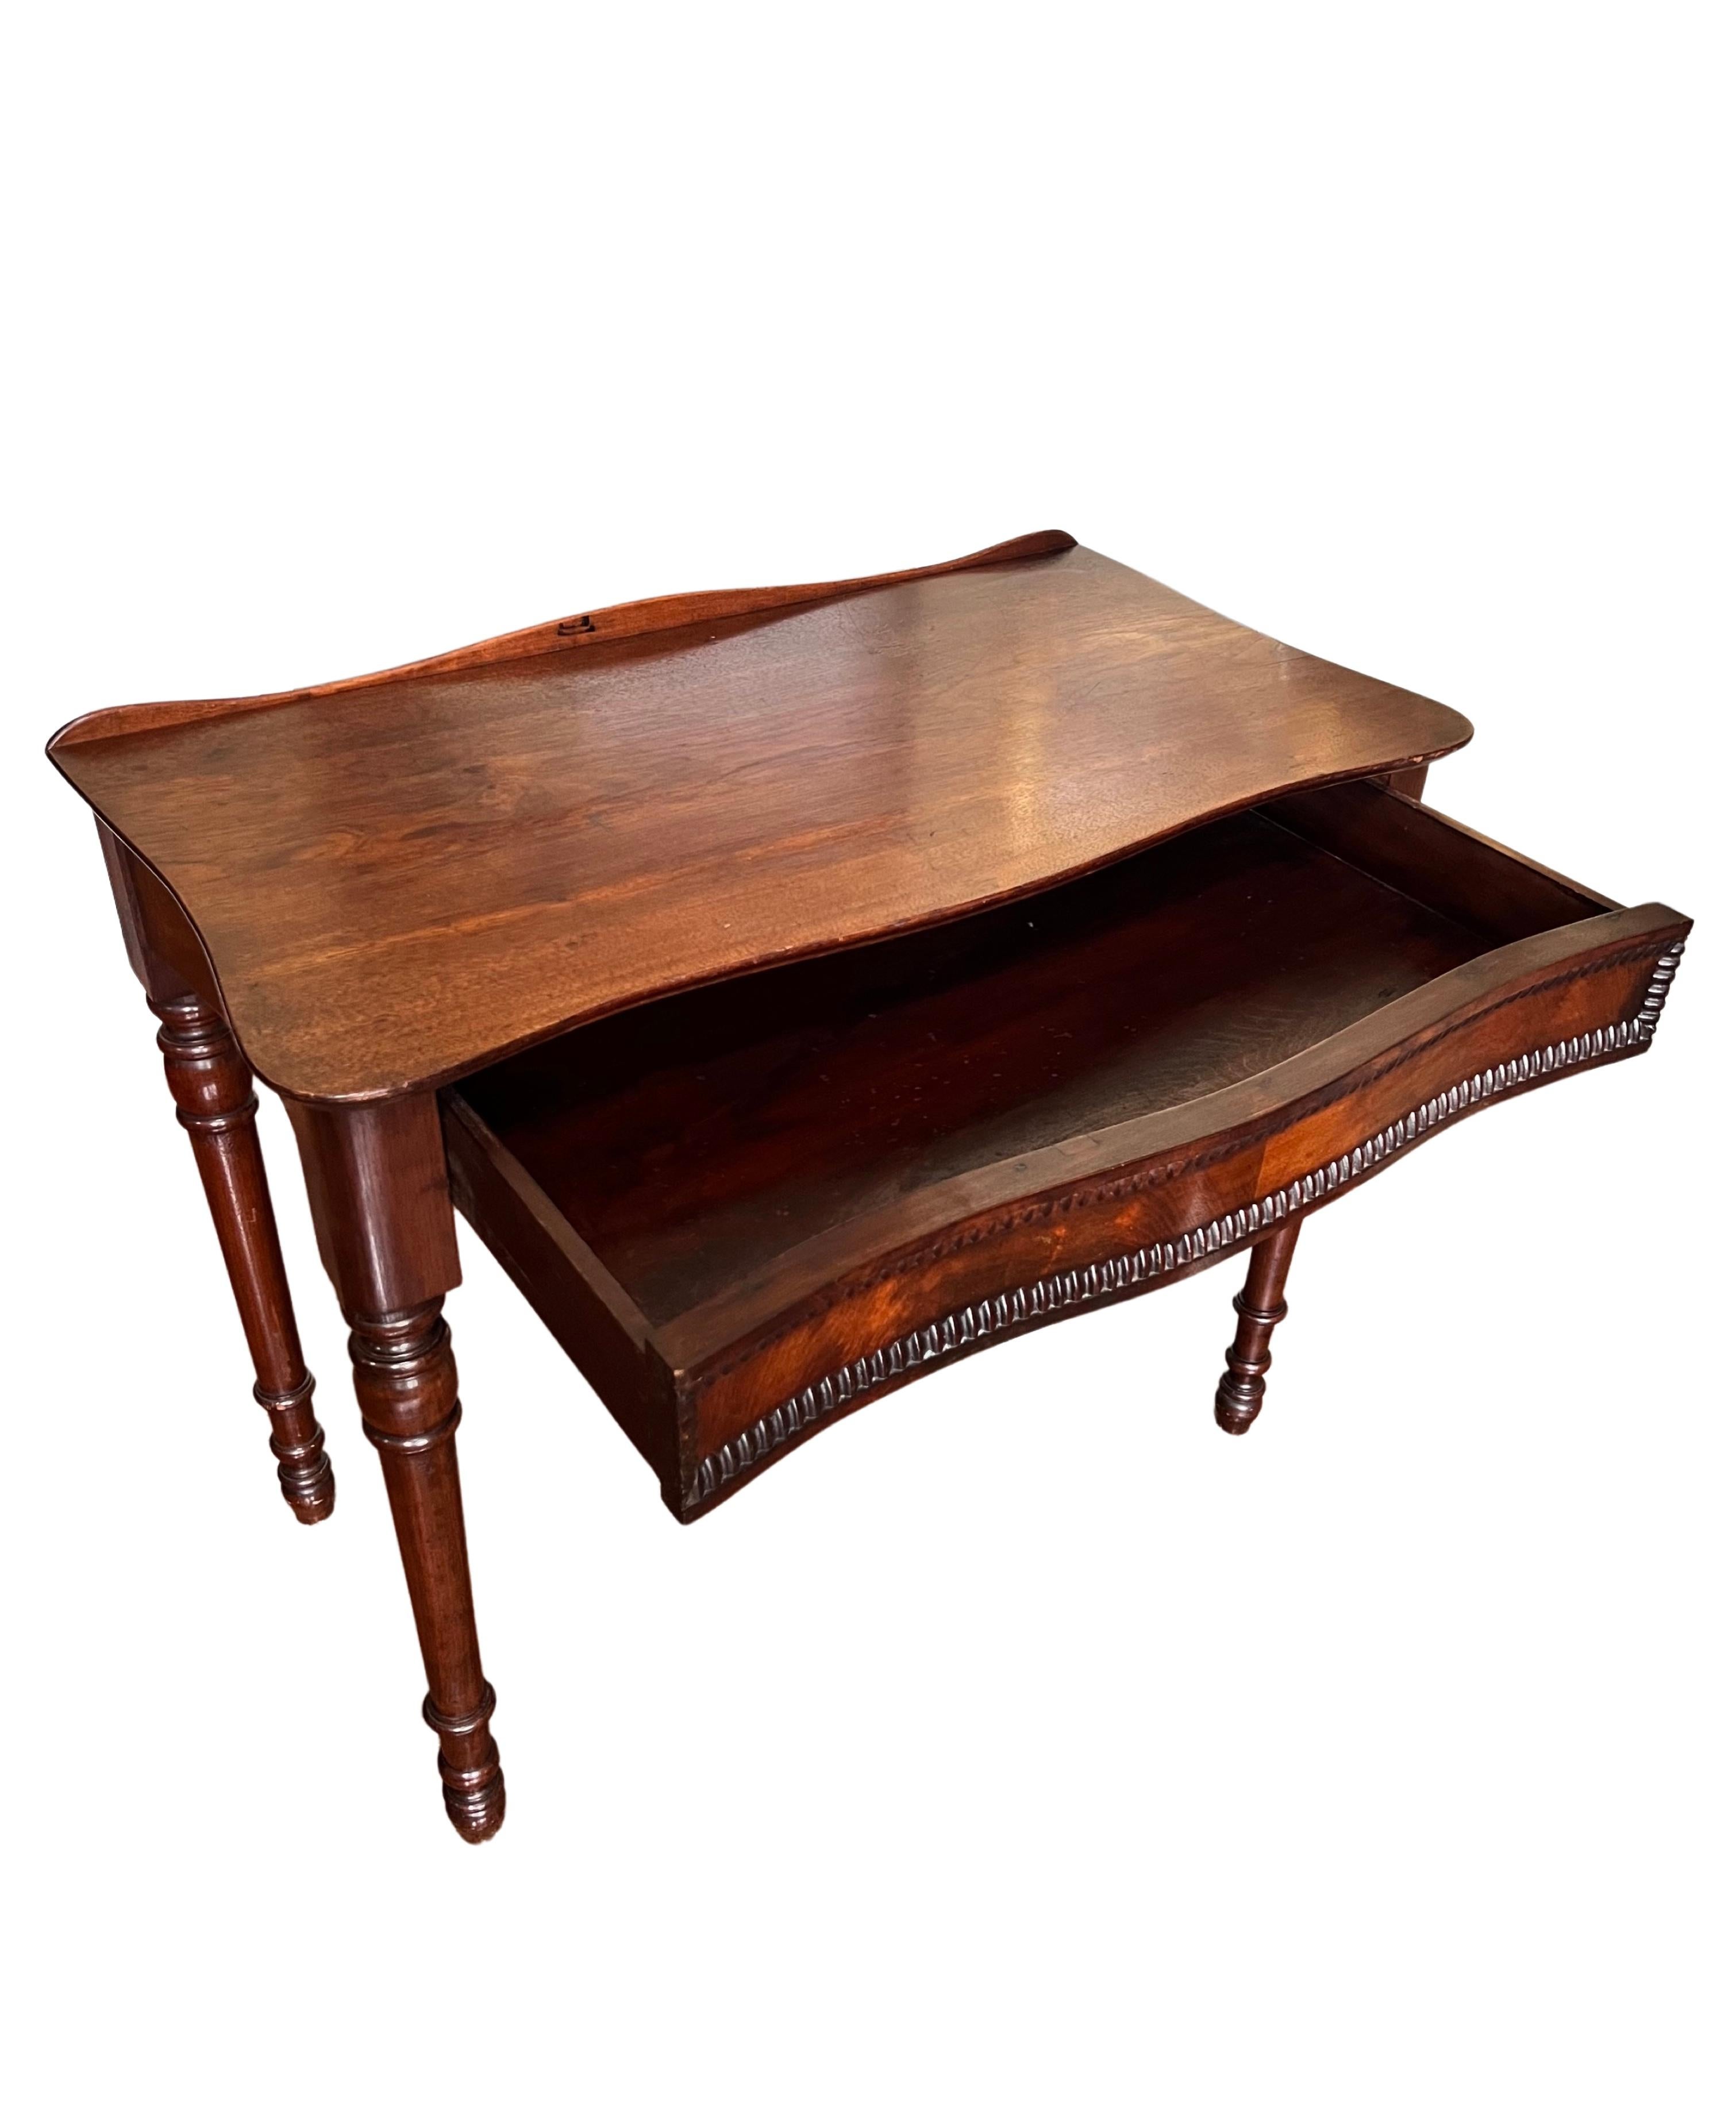 19th Century English Mahogany Serpentine Writing Desk with Single Drawer For Sale 4